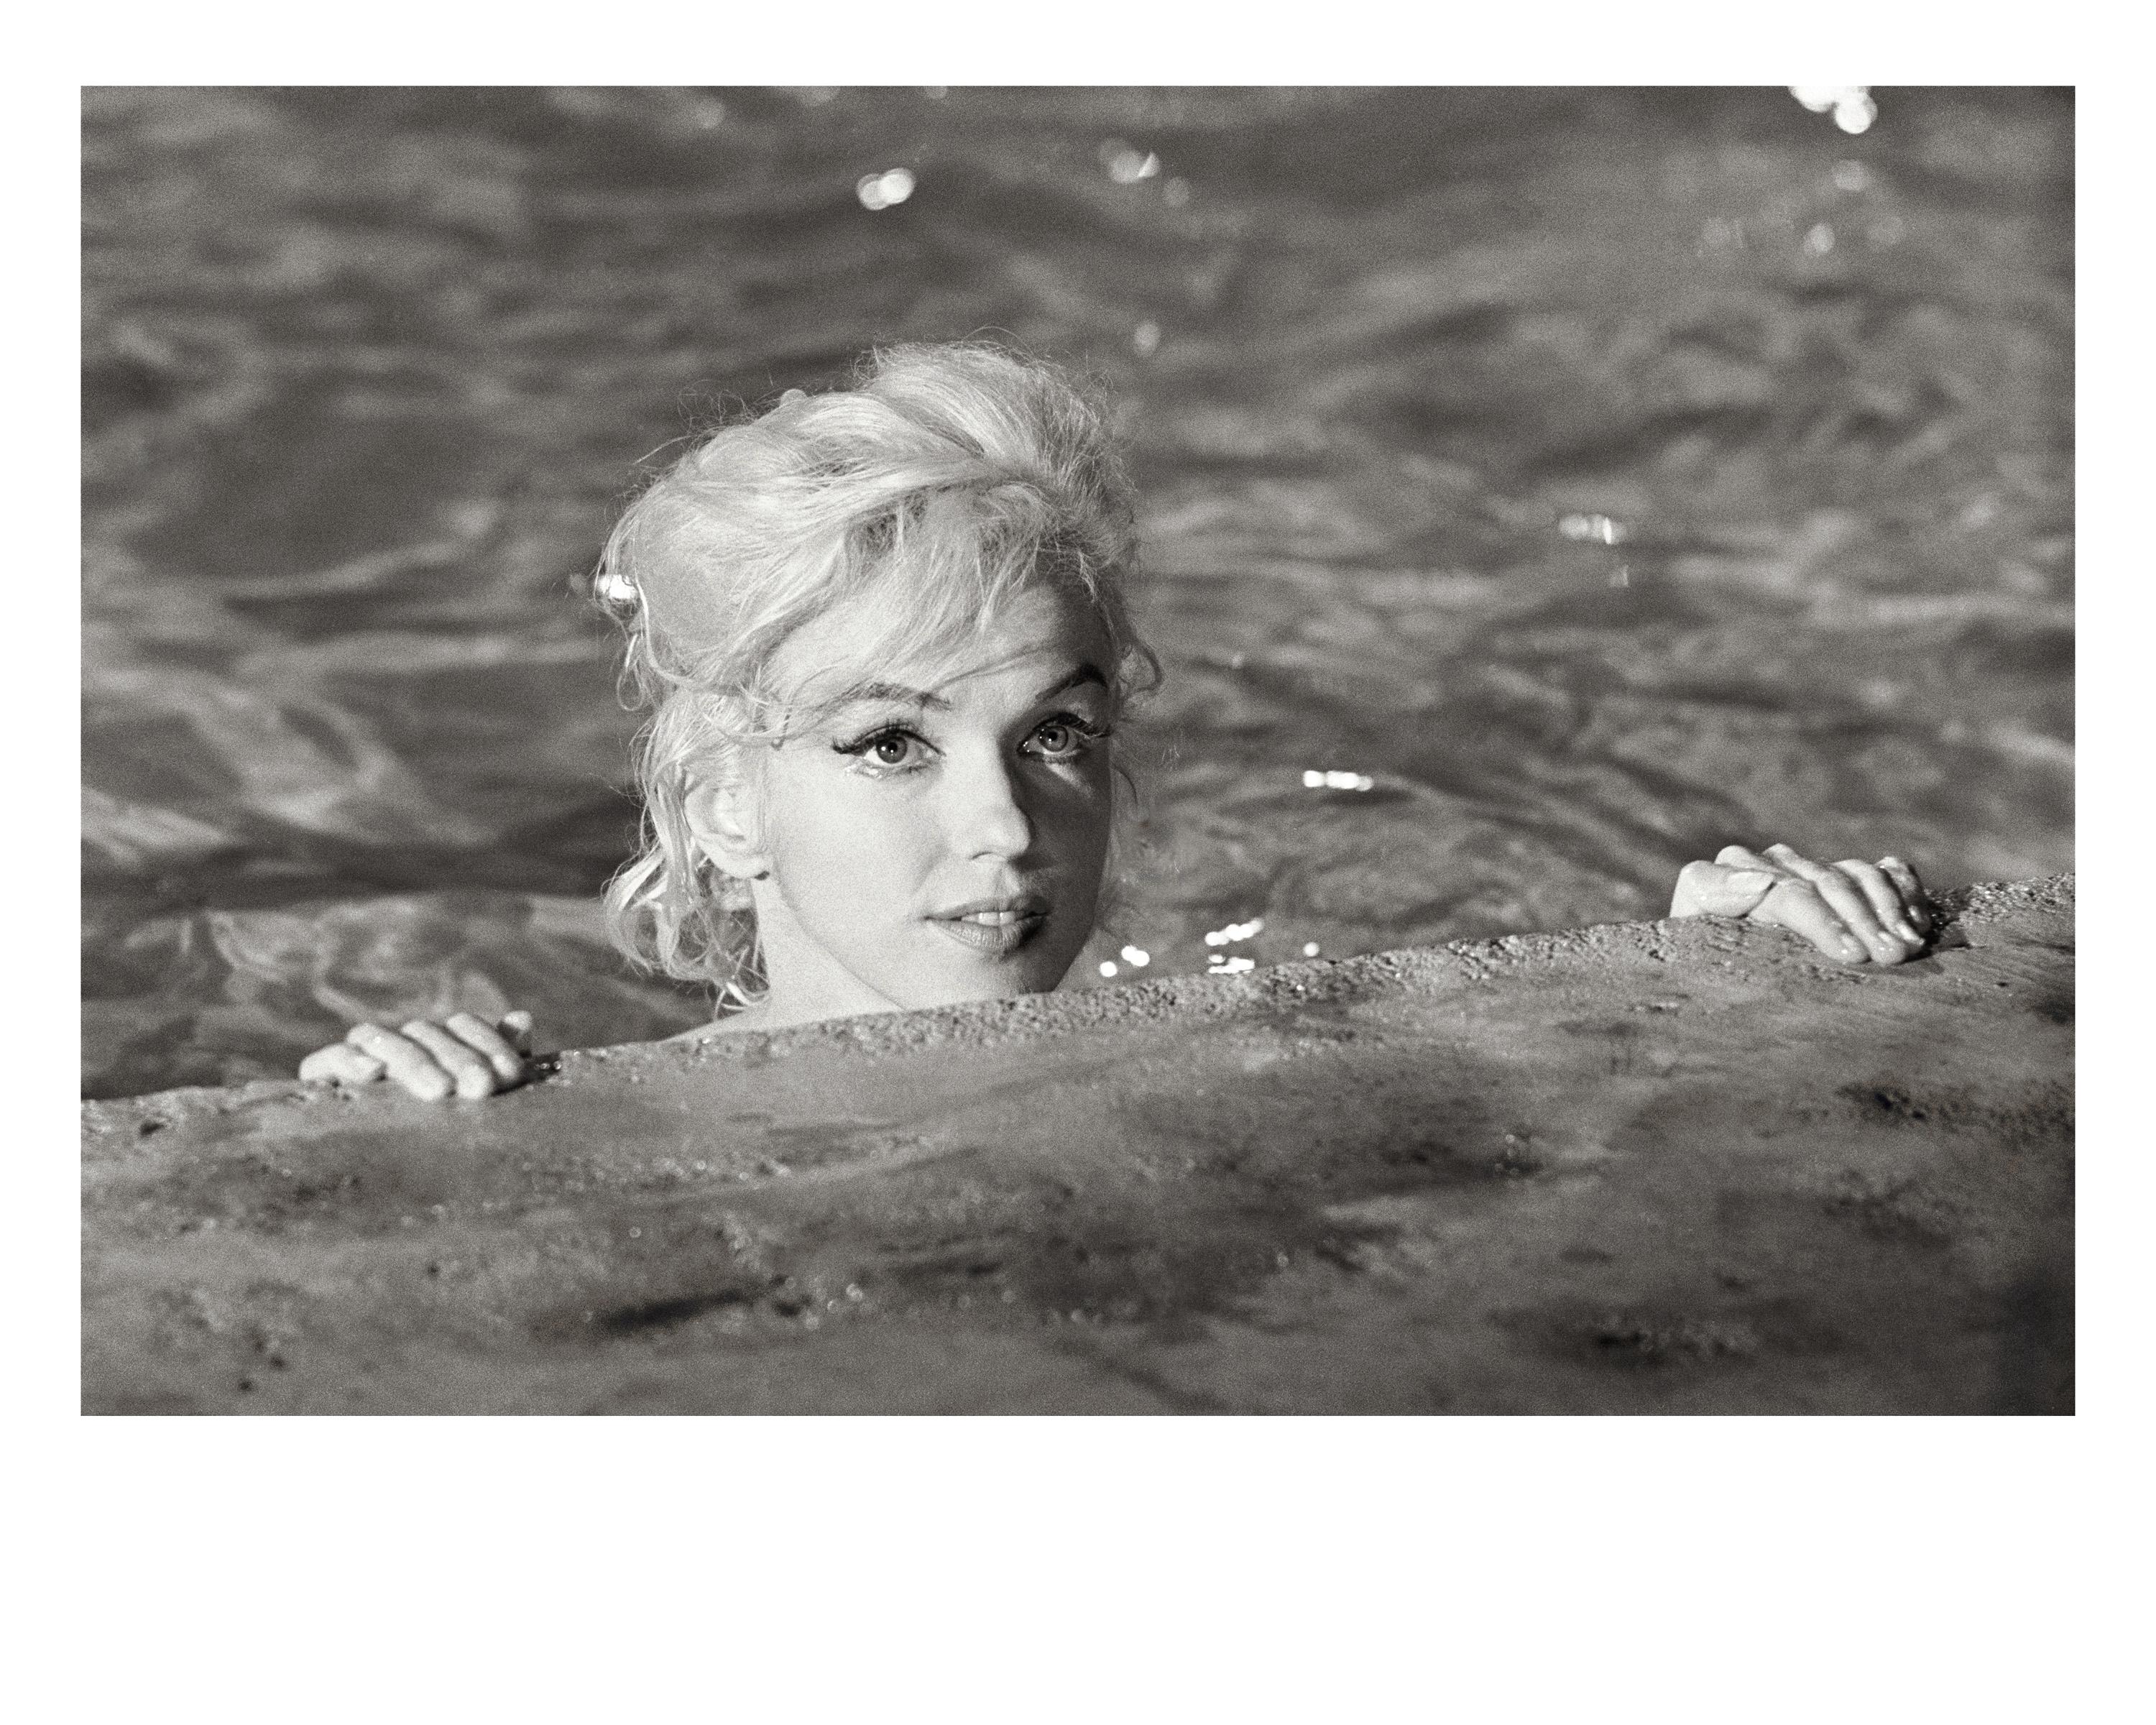 'Marilyn Monroe, 1962' by American photographer, Lawrence Schiller. Archival digital pigment, AP 3/5. Image: 12.5 x 19 in. / Paper: 16 x 20 in. From the set of the film 'Something's Got to Give', this black and white photograph features Marilyn